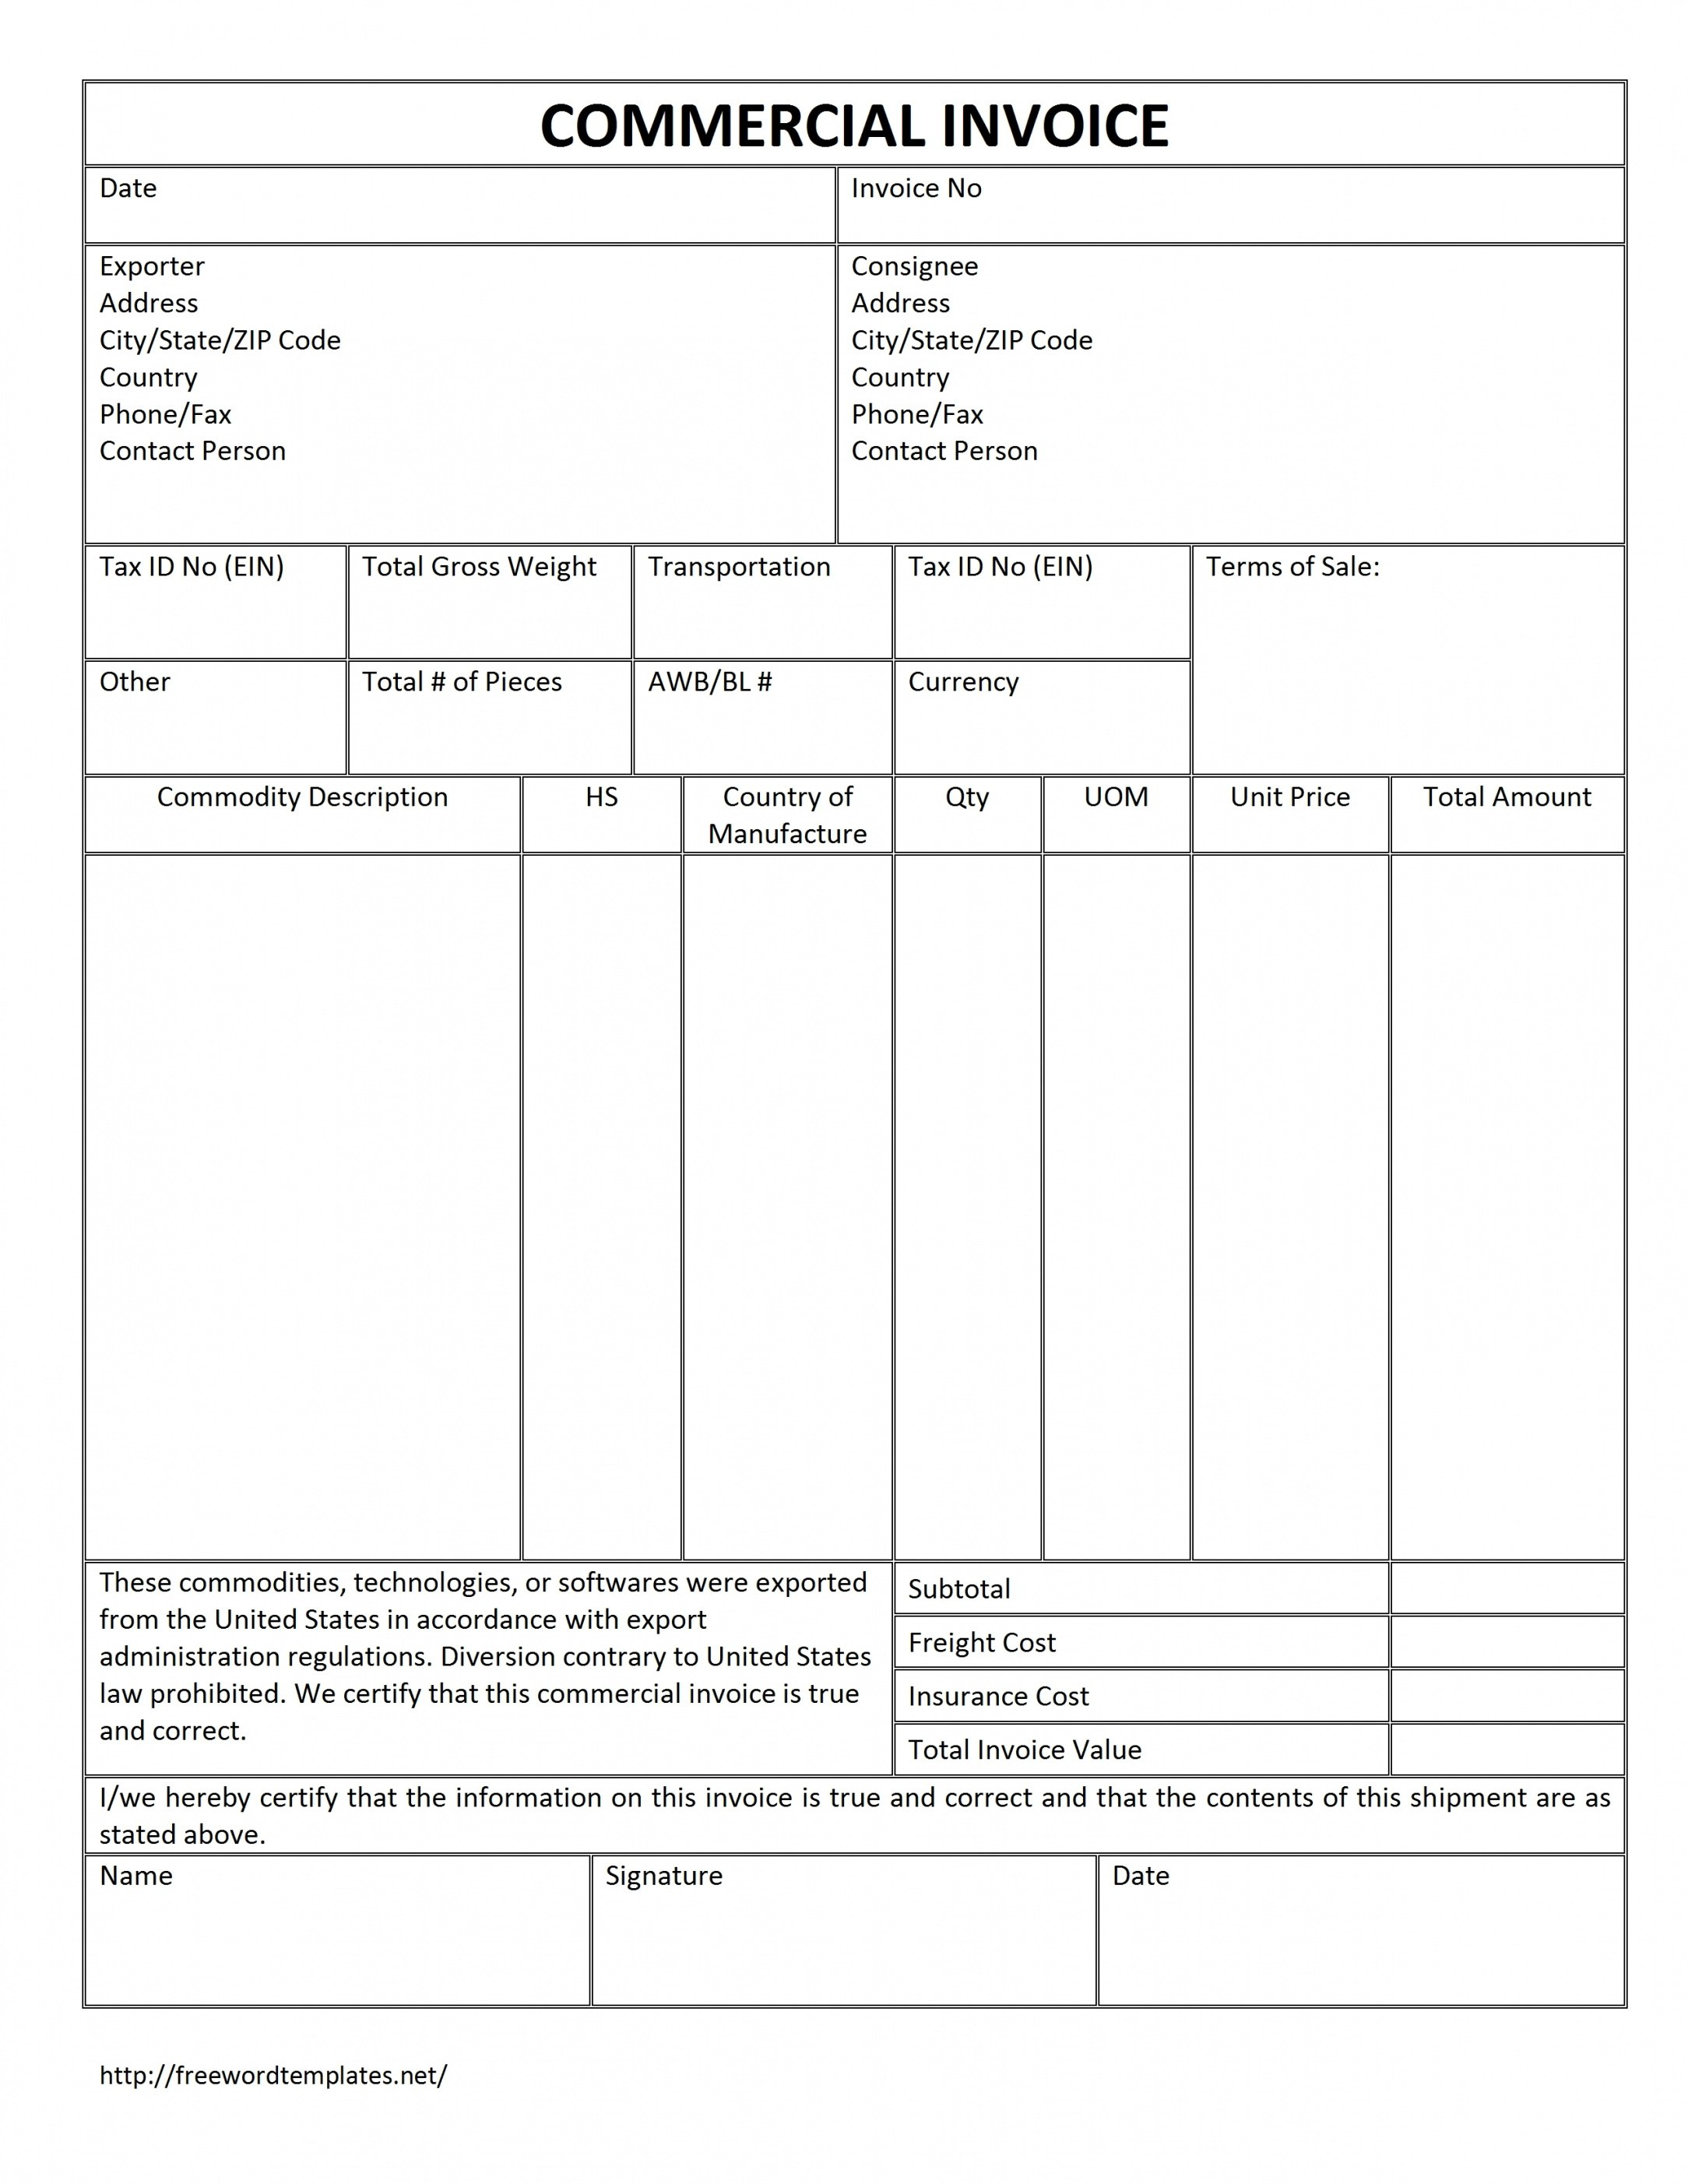 Customs Invoice Template – Meloyogawithjoco Customs Commercial with Customs Commercial Invoice Template